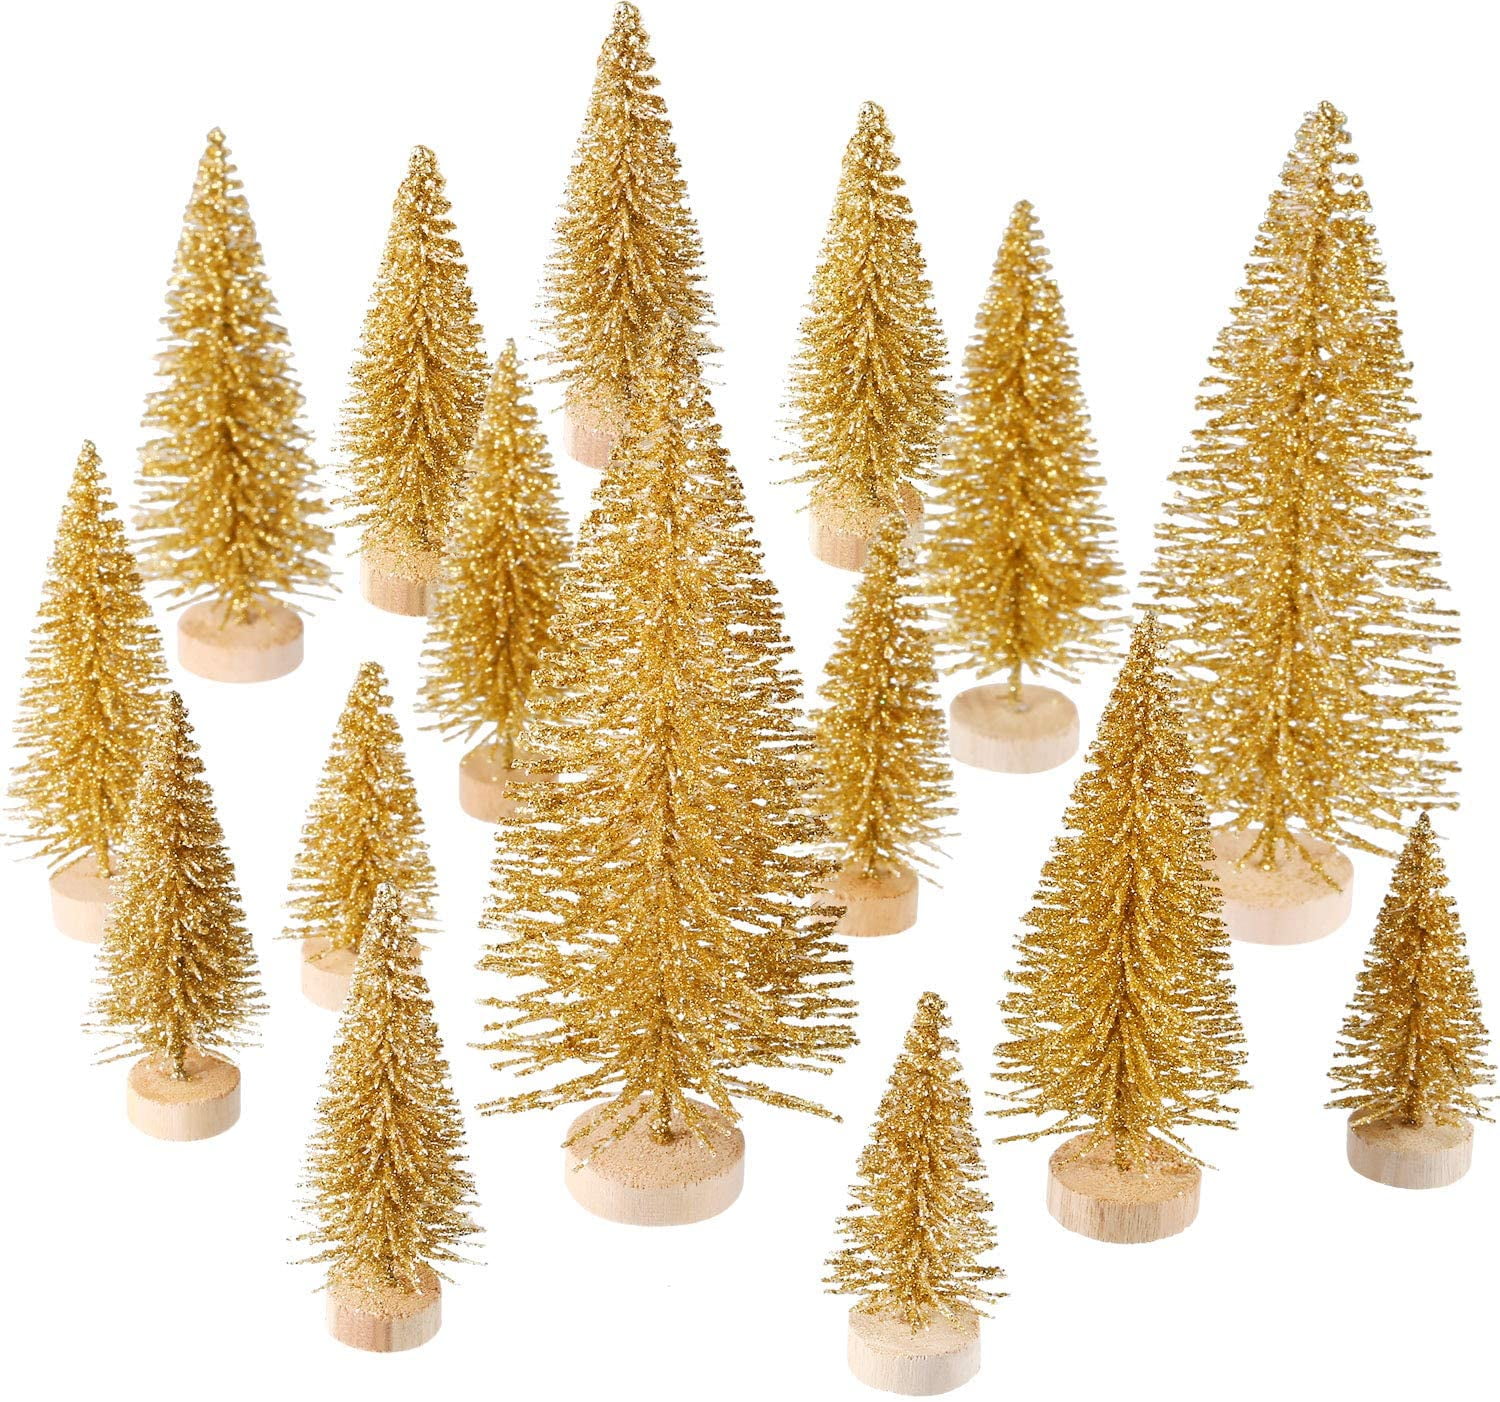 Mini Pine Trees for Crafts Miniature Christmas Tree with Snow S: 2.36in.  3Pcs